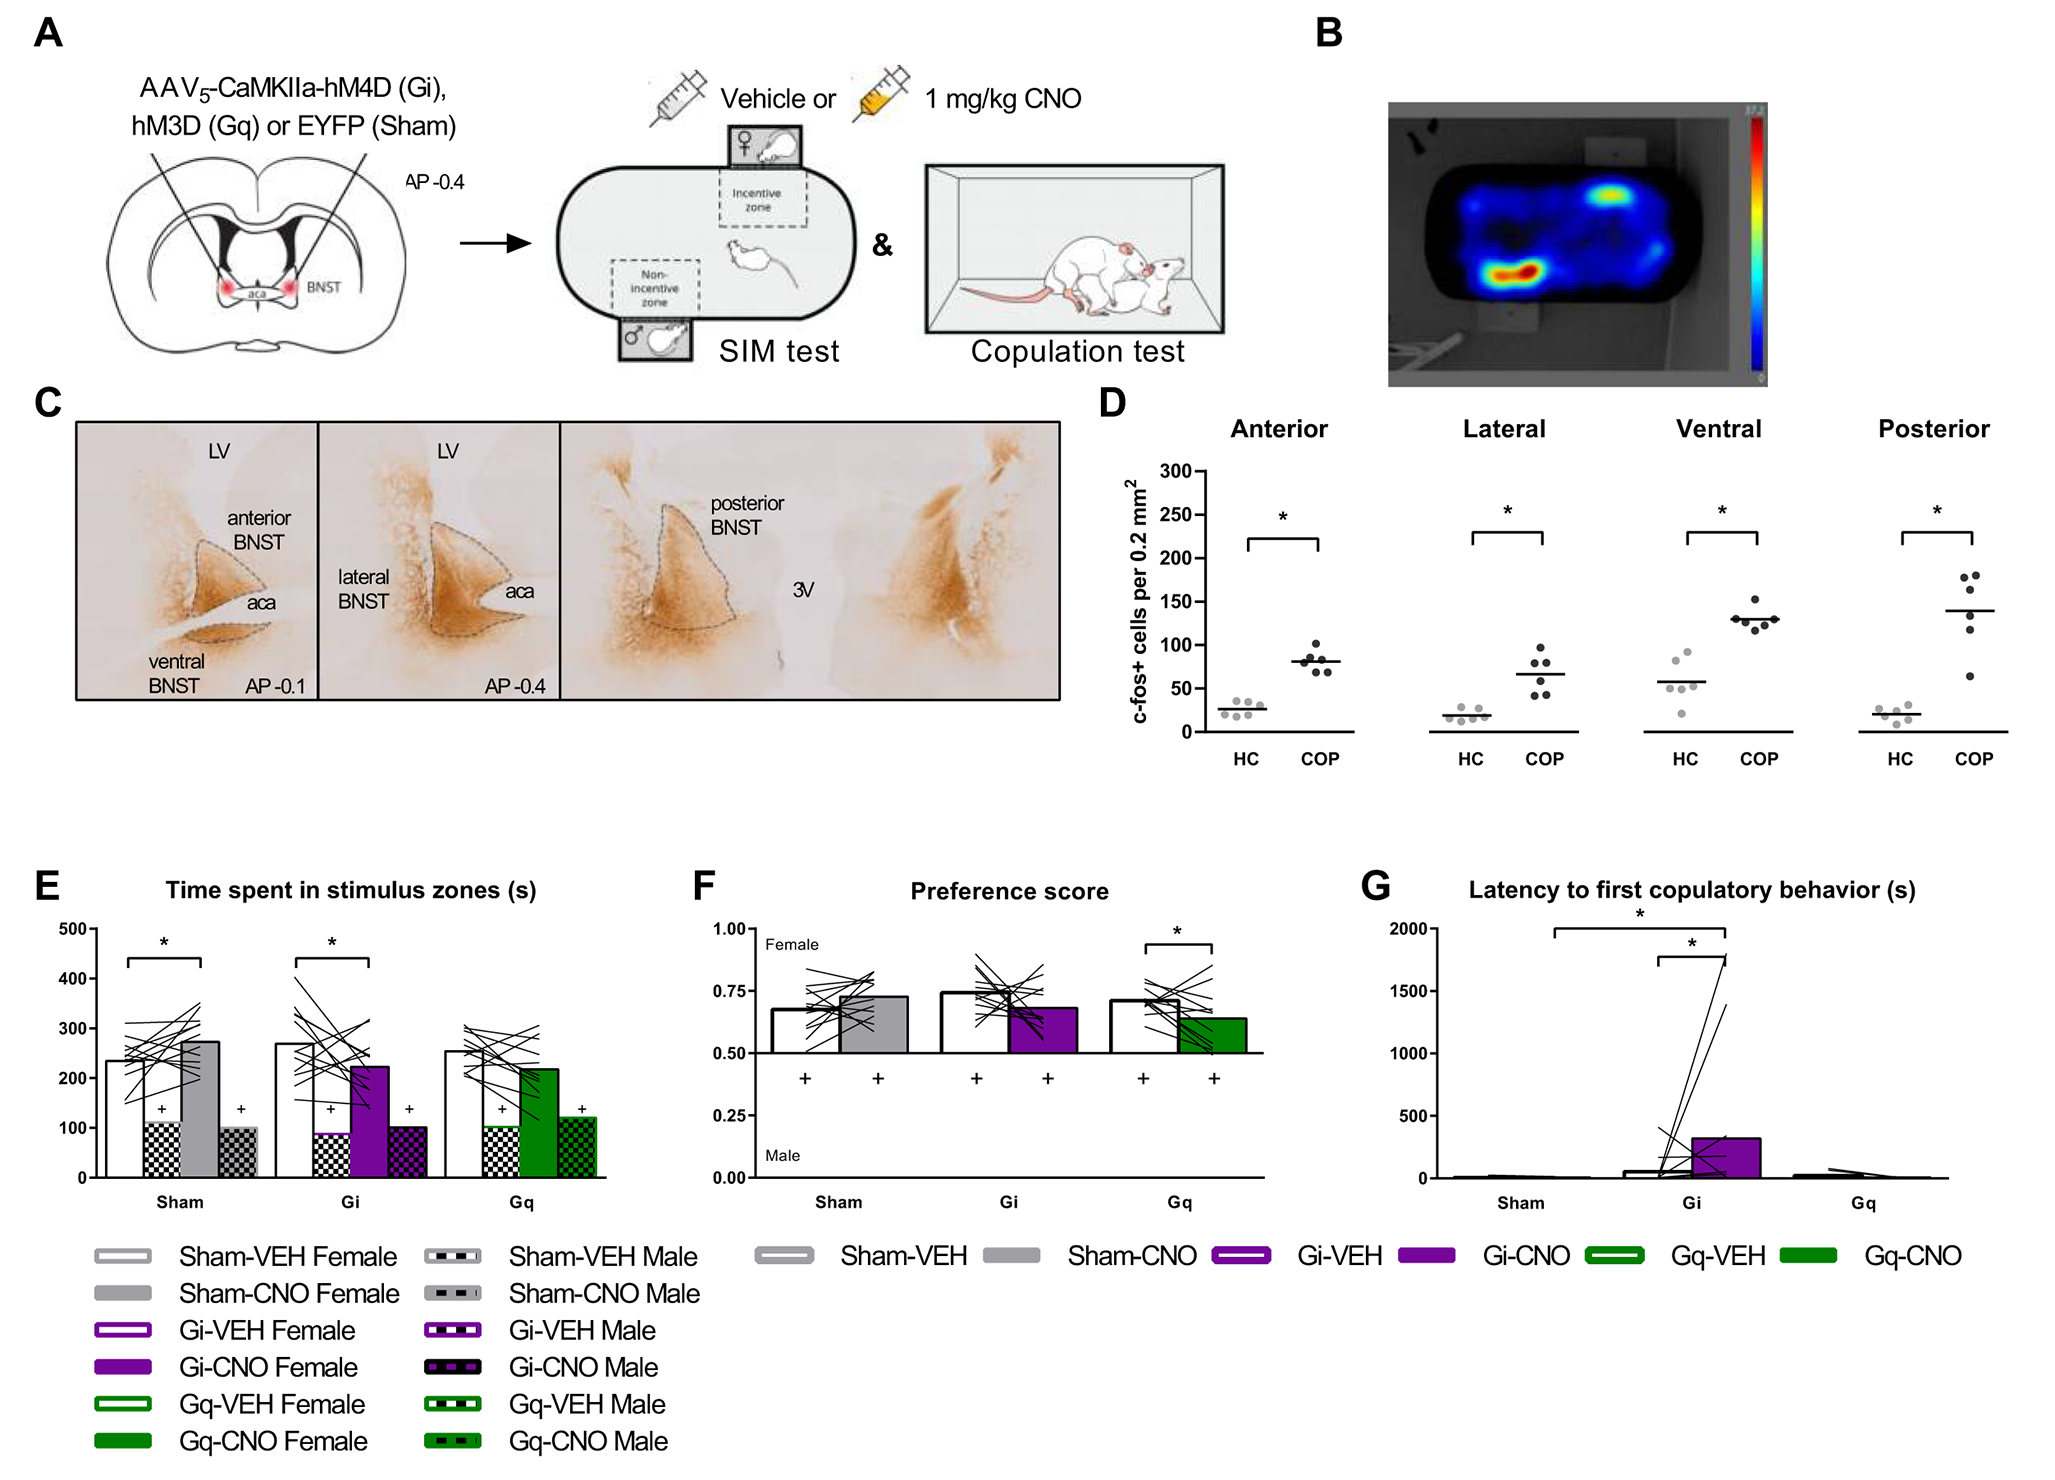 CaMKIIa+ neurons in the bed nucleus of the stria terminalis modulate pace of natural reward seeking depending on internal state